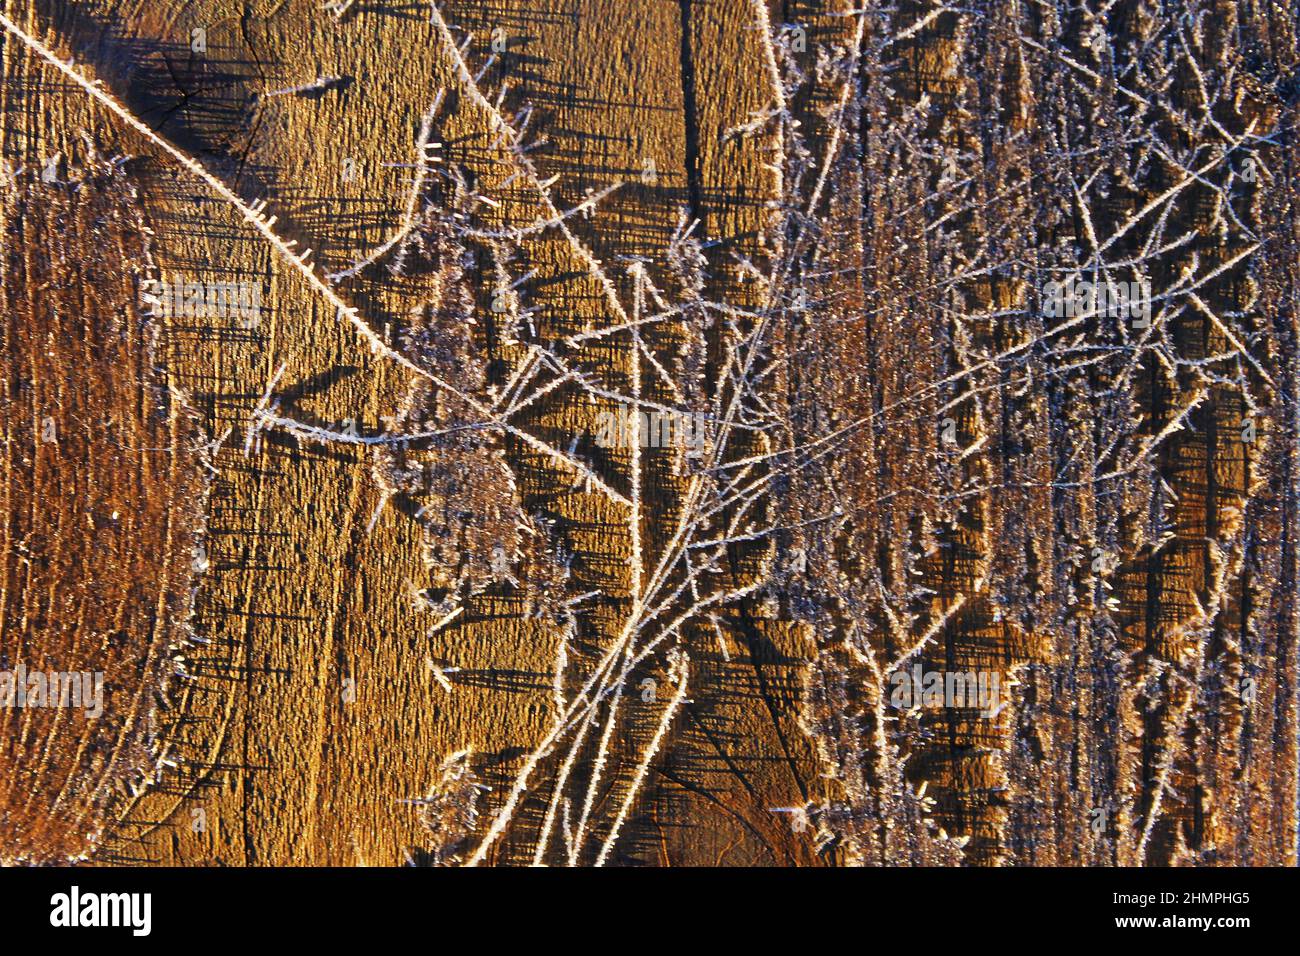 Frost patterns on wooden fence palings. Stock Photo